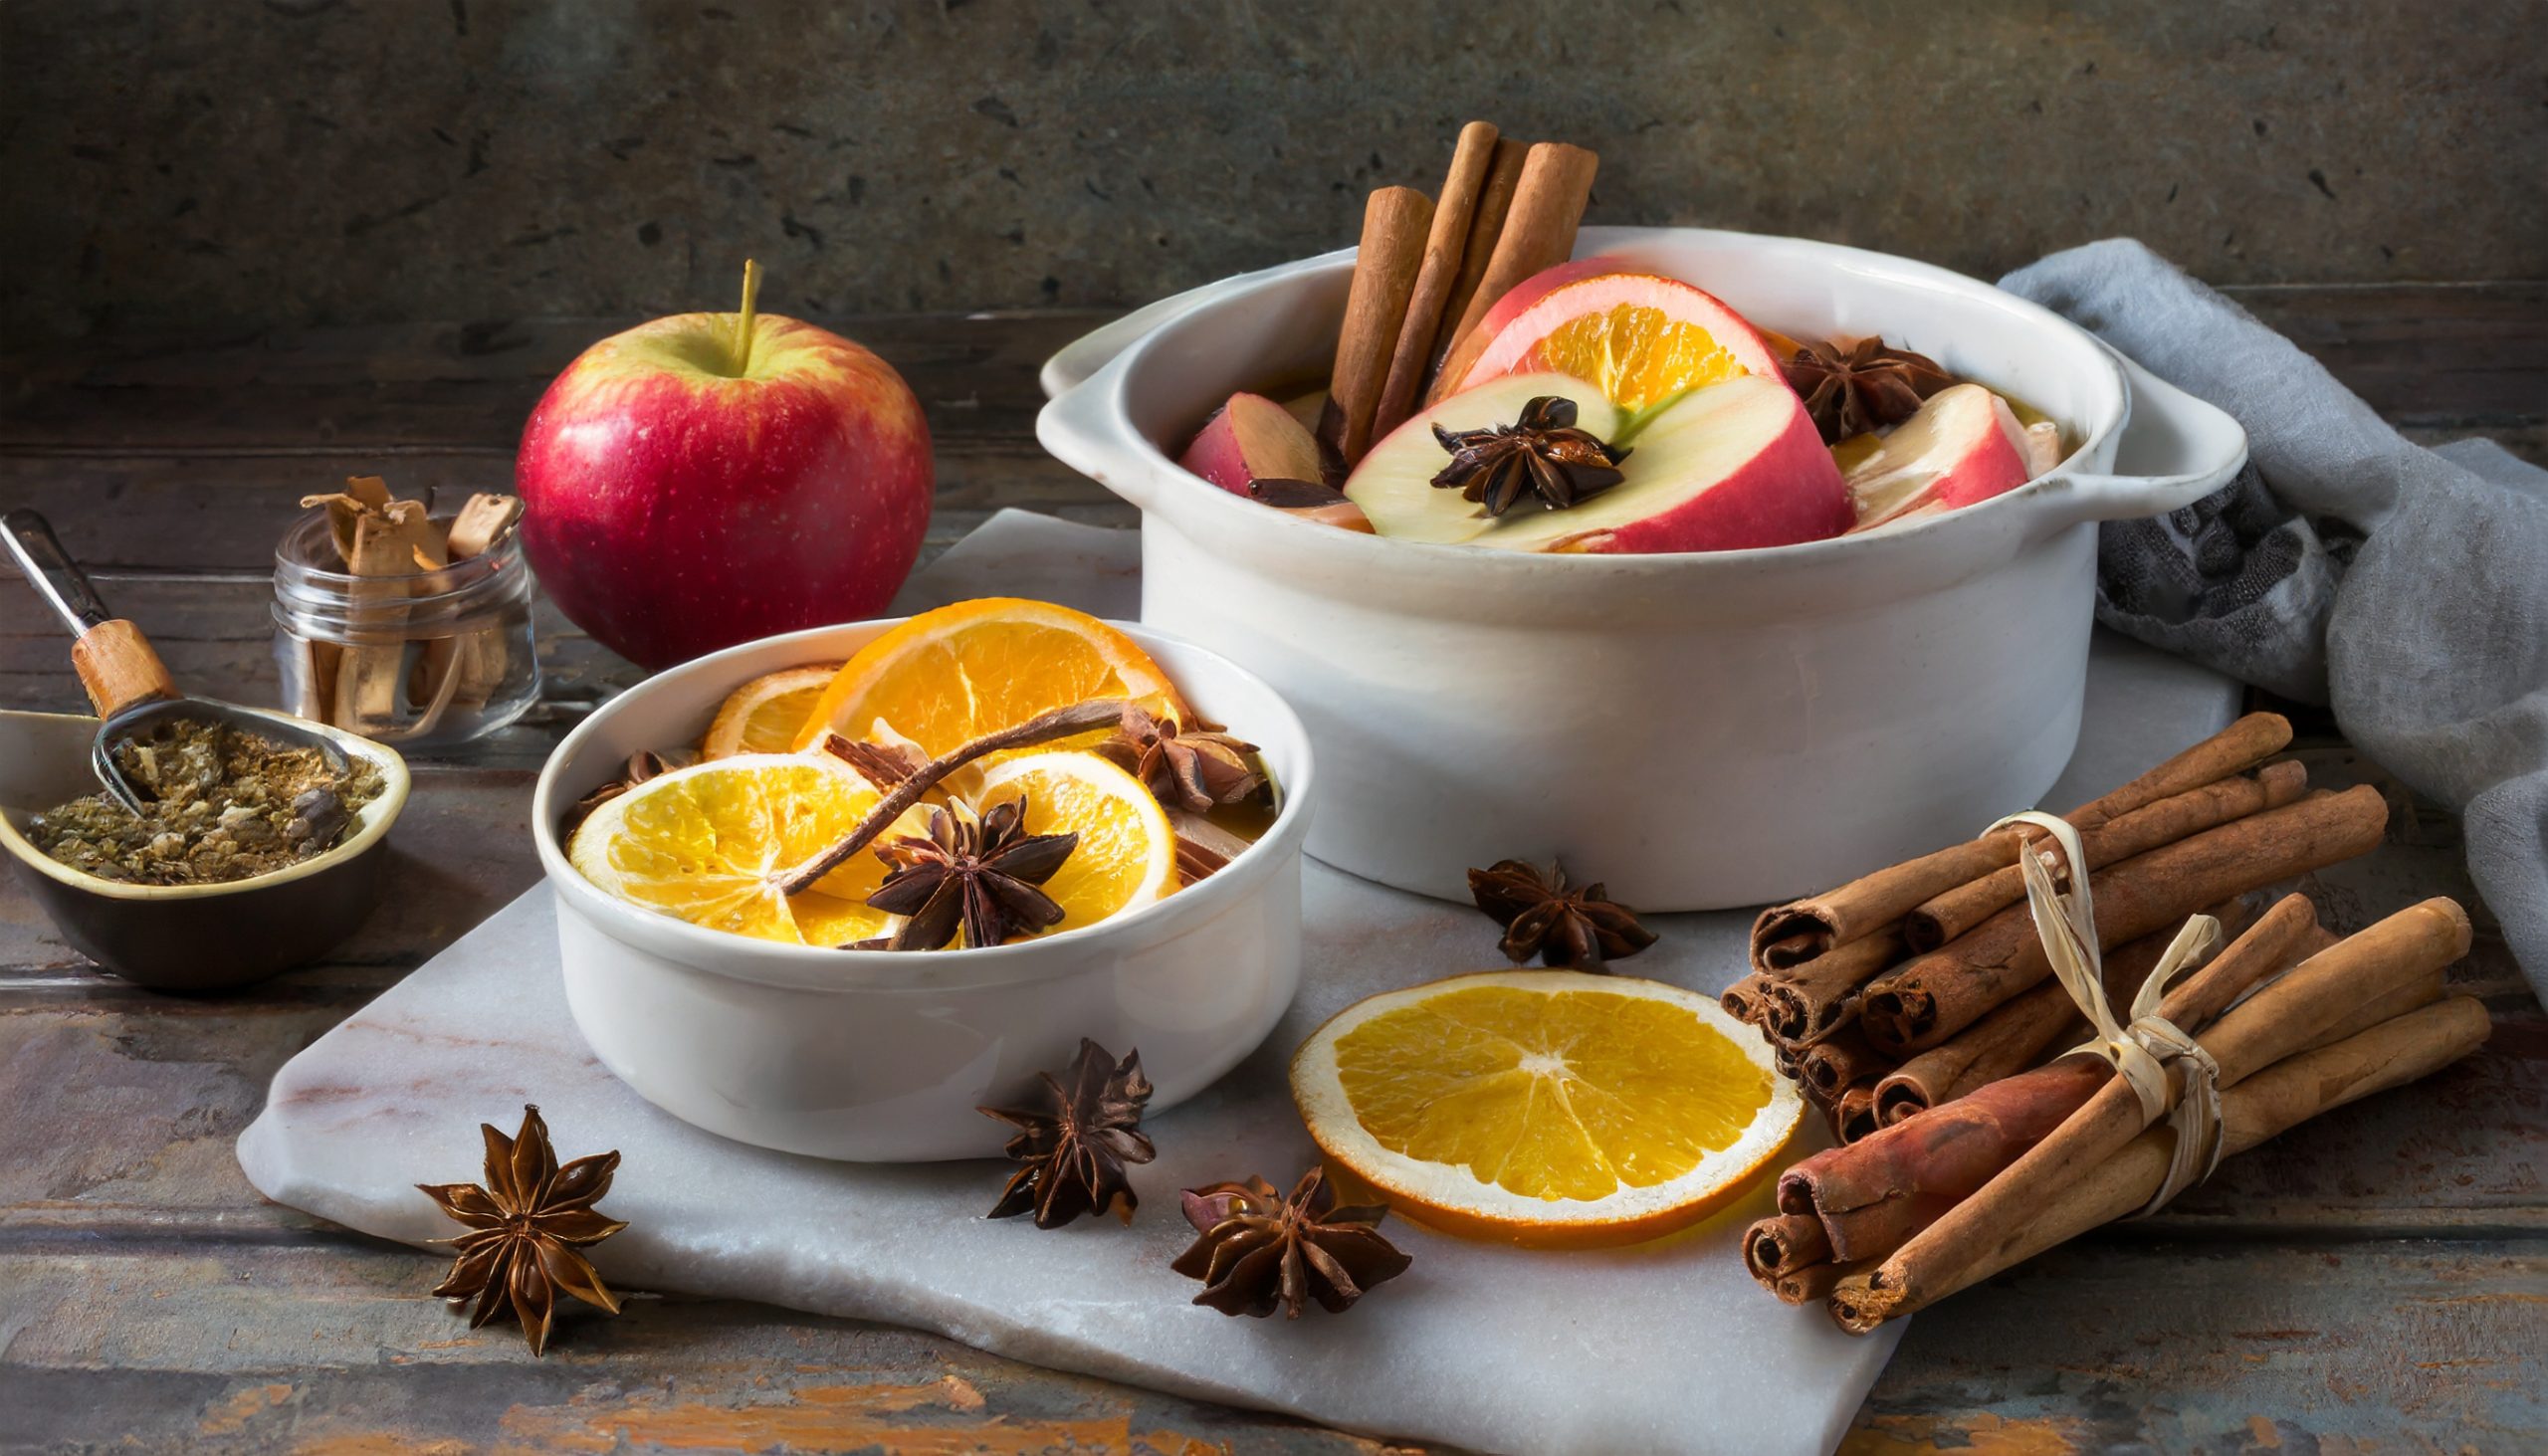 Homemade Potpourri Made With Apples, Oranges and Cinnamon